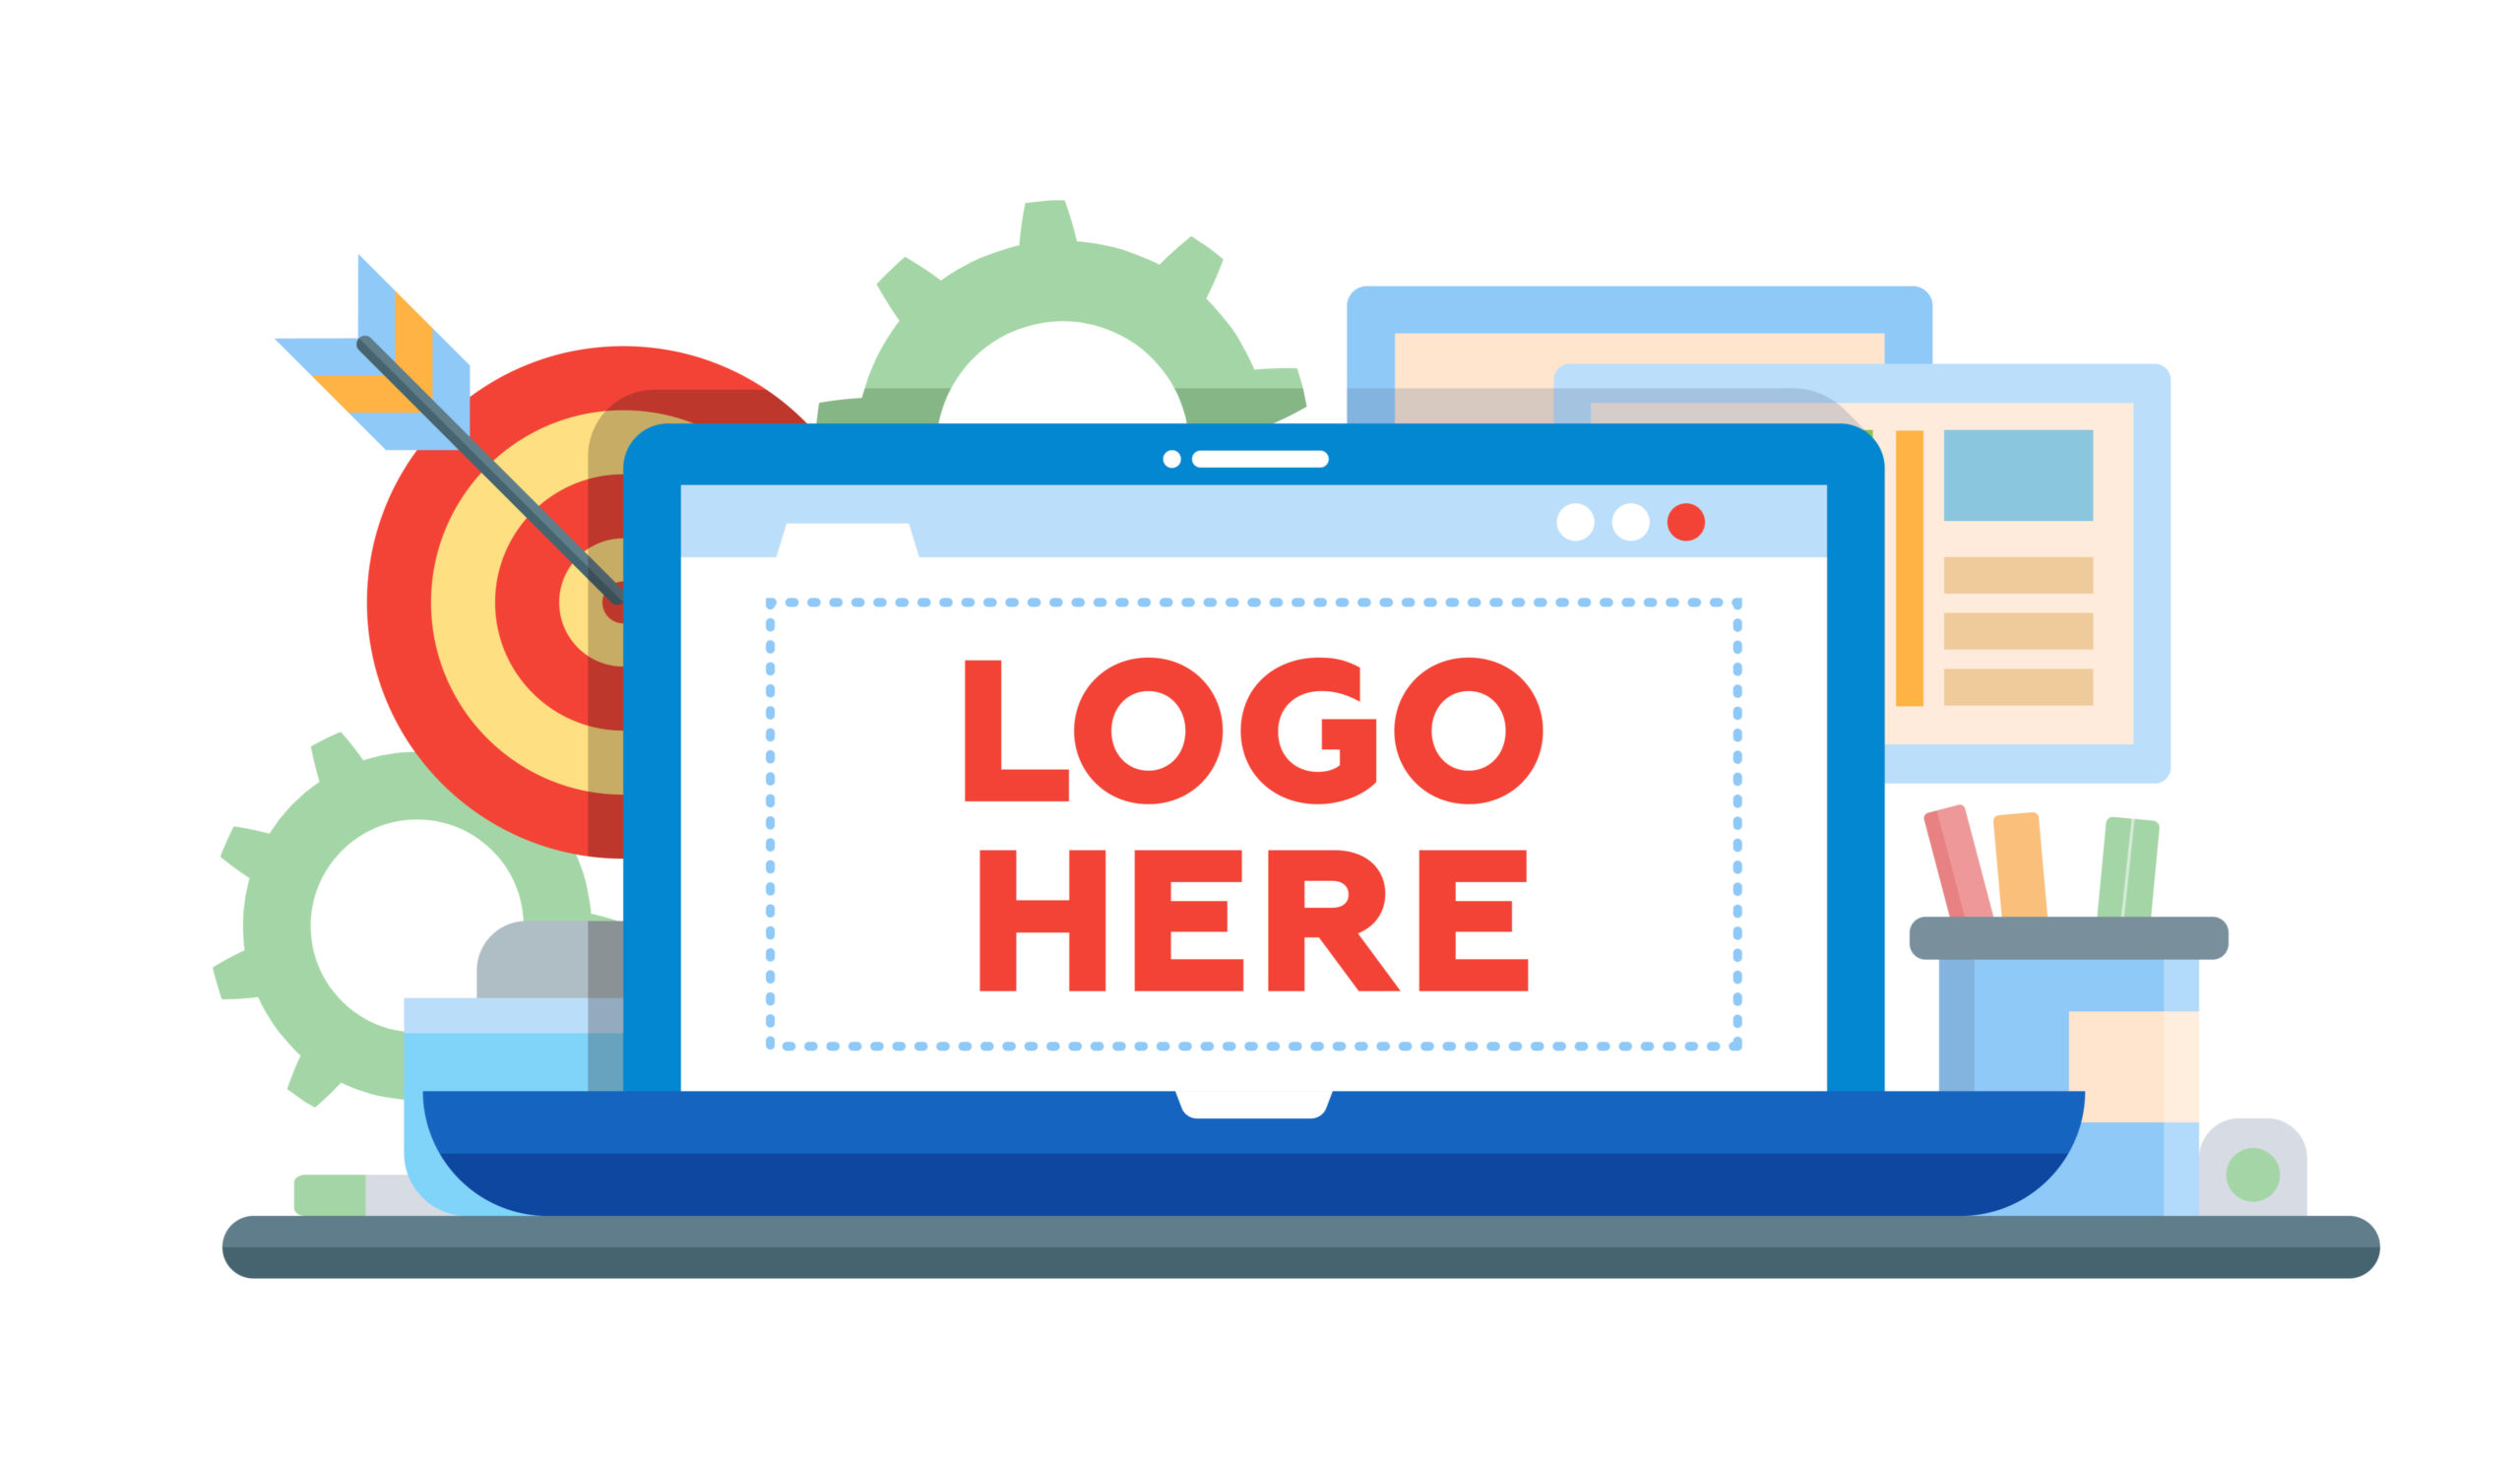 logo here image placement template